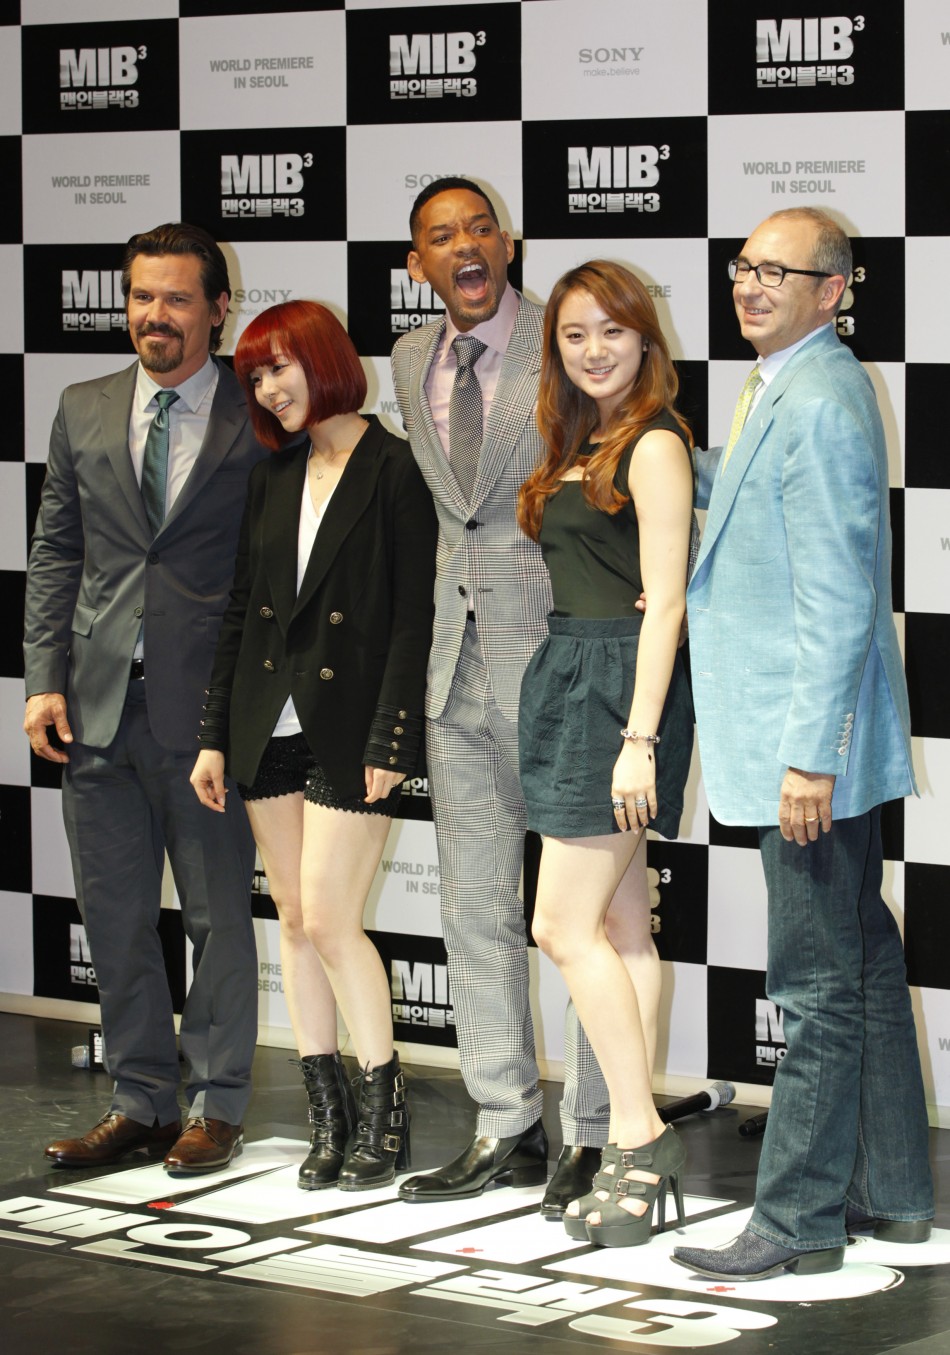 Cast members Will Smith and Josh Brolin pose together with director Barry Sonnenfeld and K-pop girl group, quotWonder Girlsquot members Sunye and Hyerim in Seoul